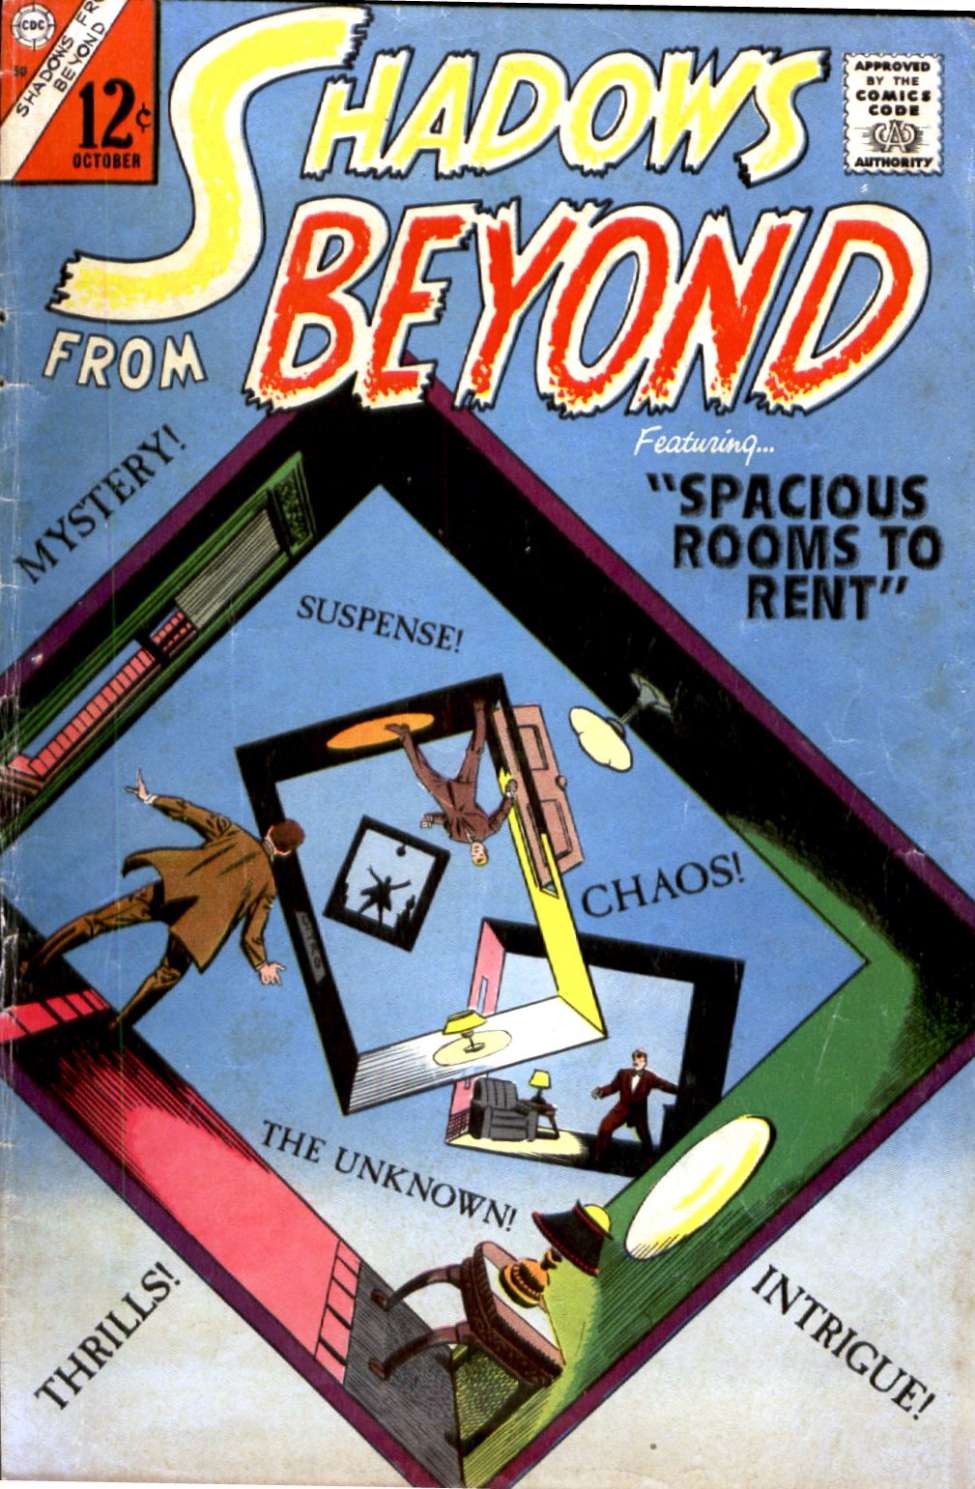 Book Cover For Shadows from Beyond 50